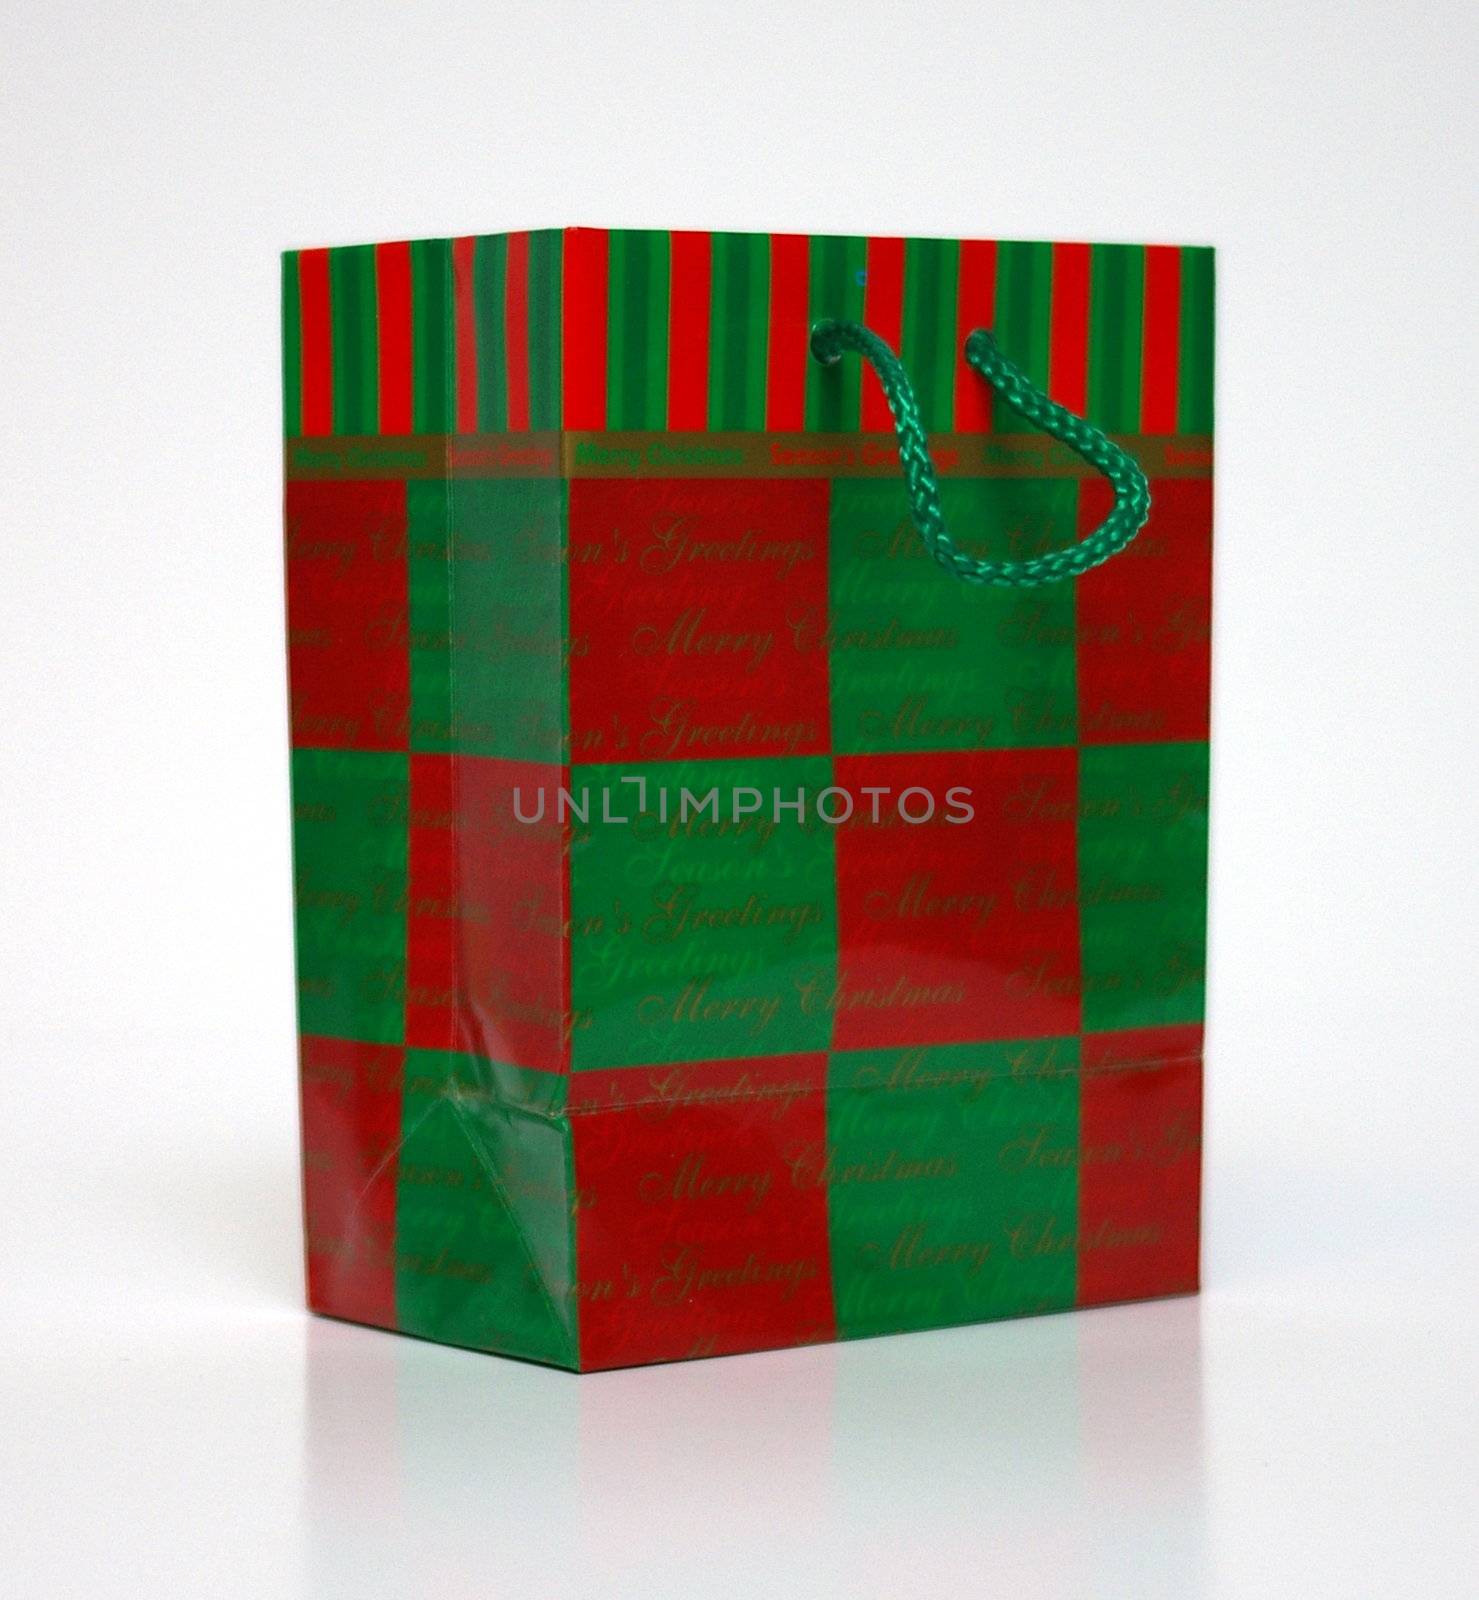 A red and green gift bag on a white background